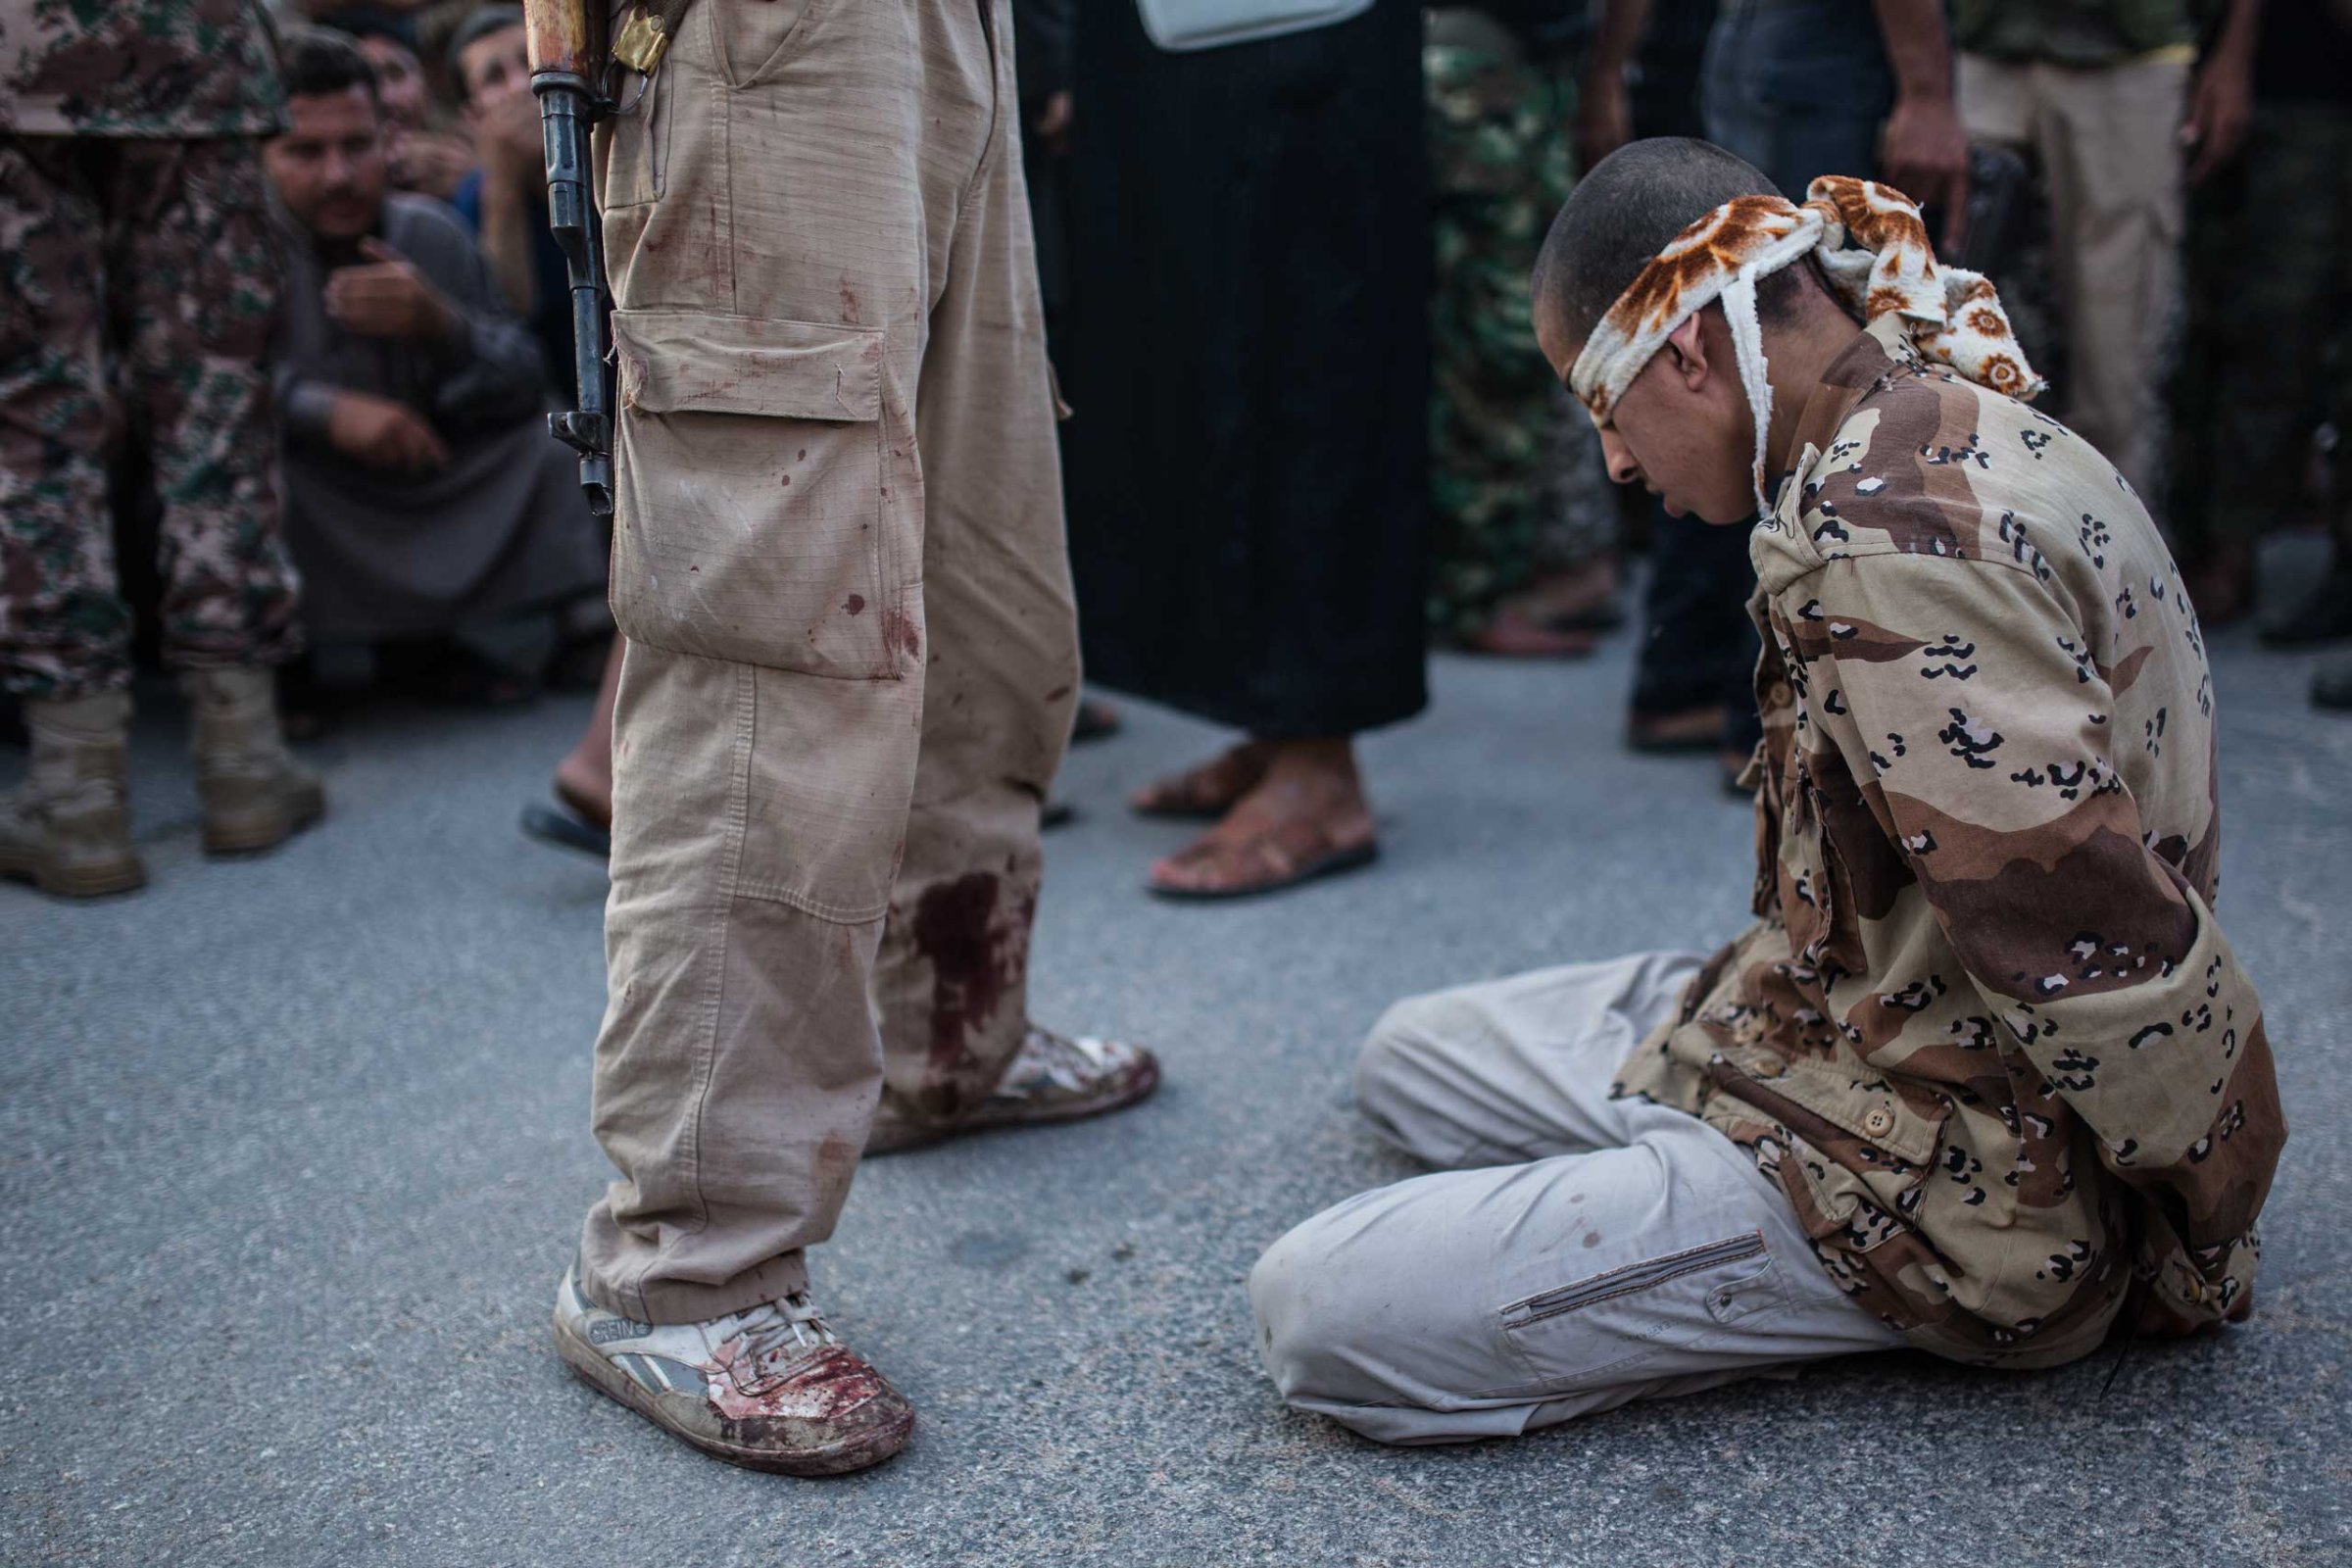 A young Syrian man kneels blindfolded before anti-regime rebels publicly executed him in the town of Keferghan, near Aleppo, on August 31, 2013.